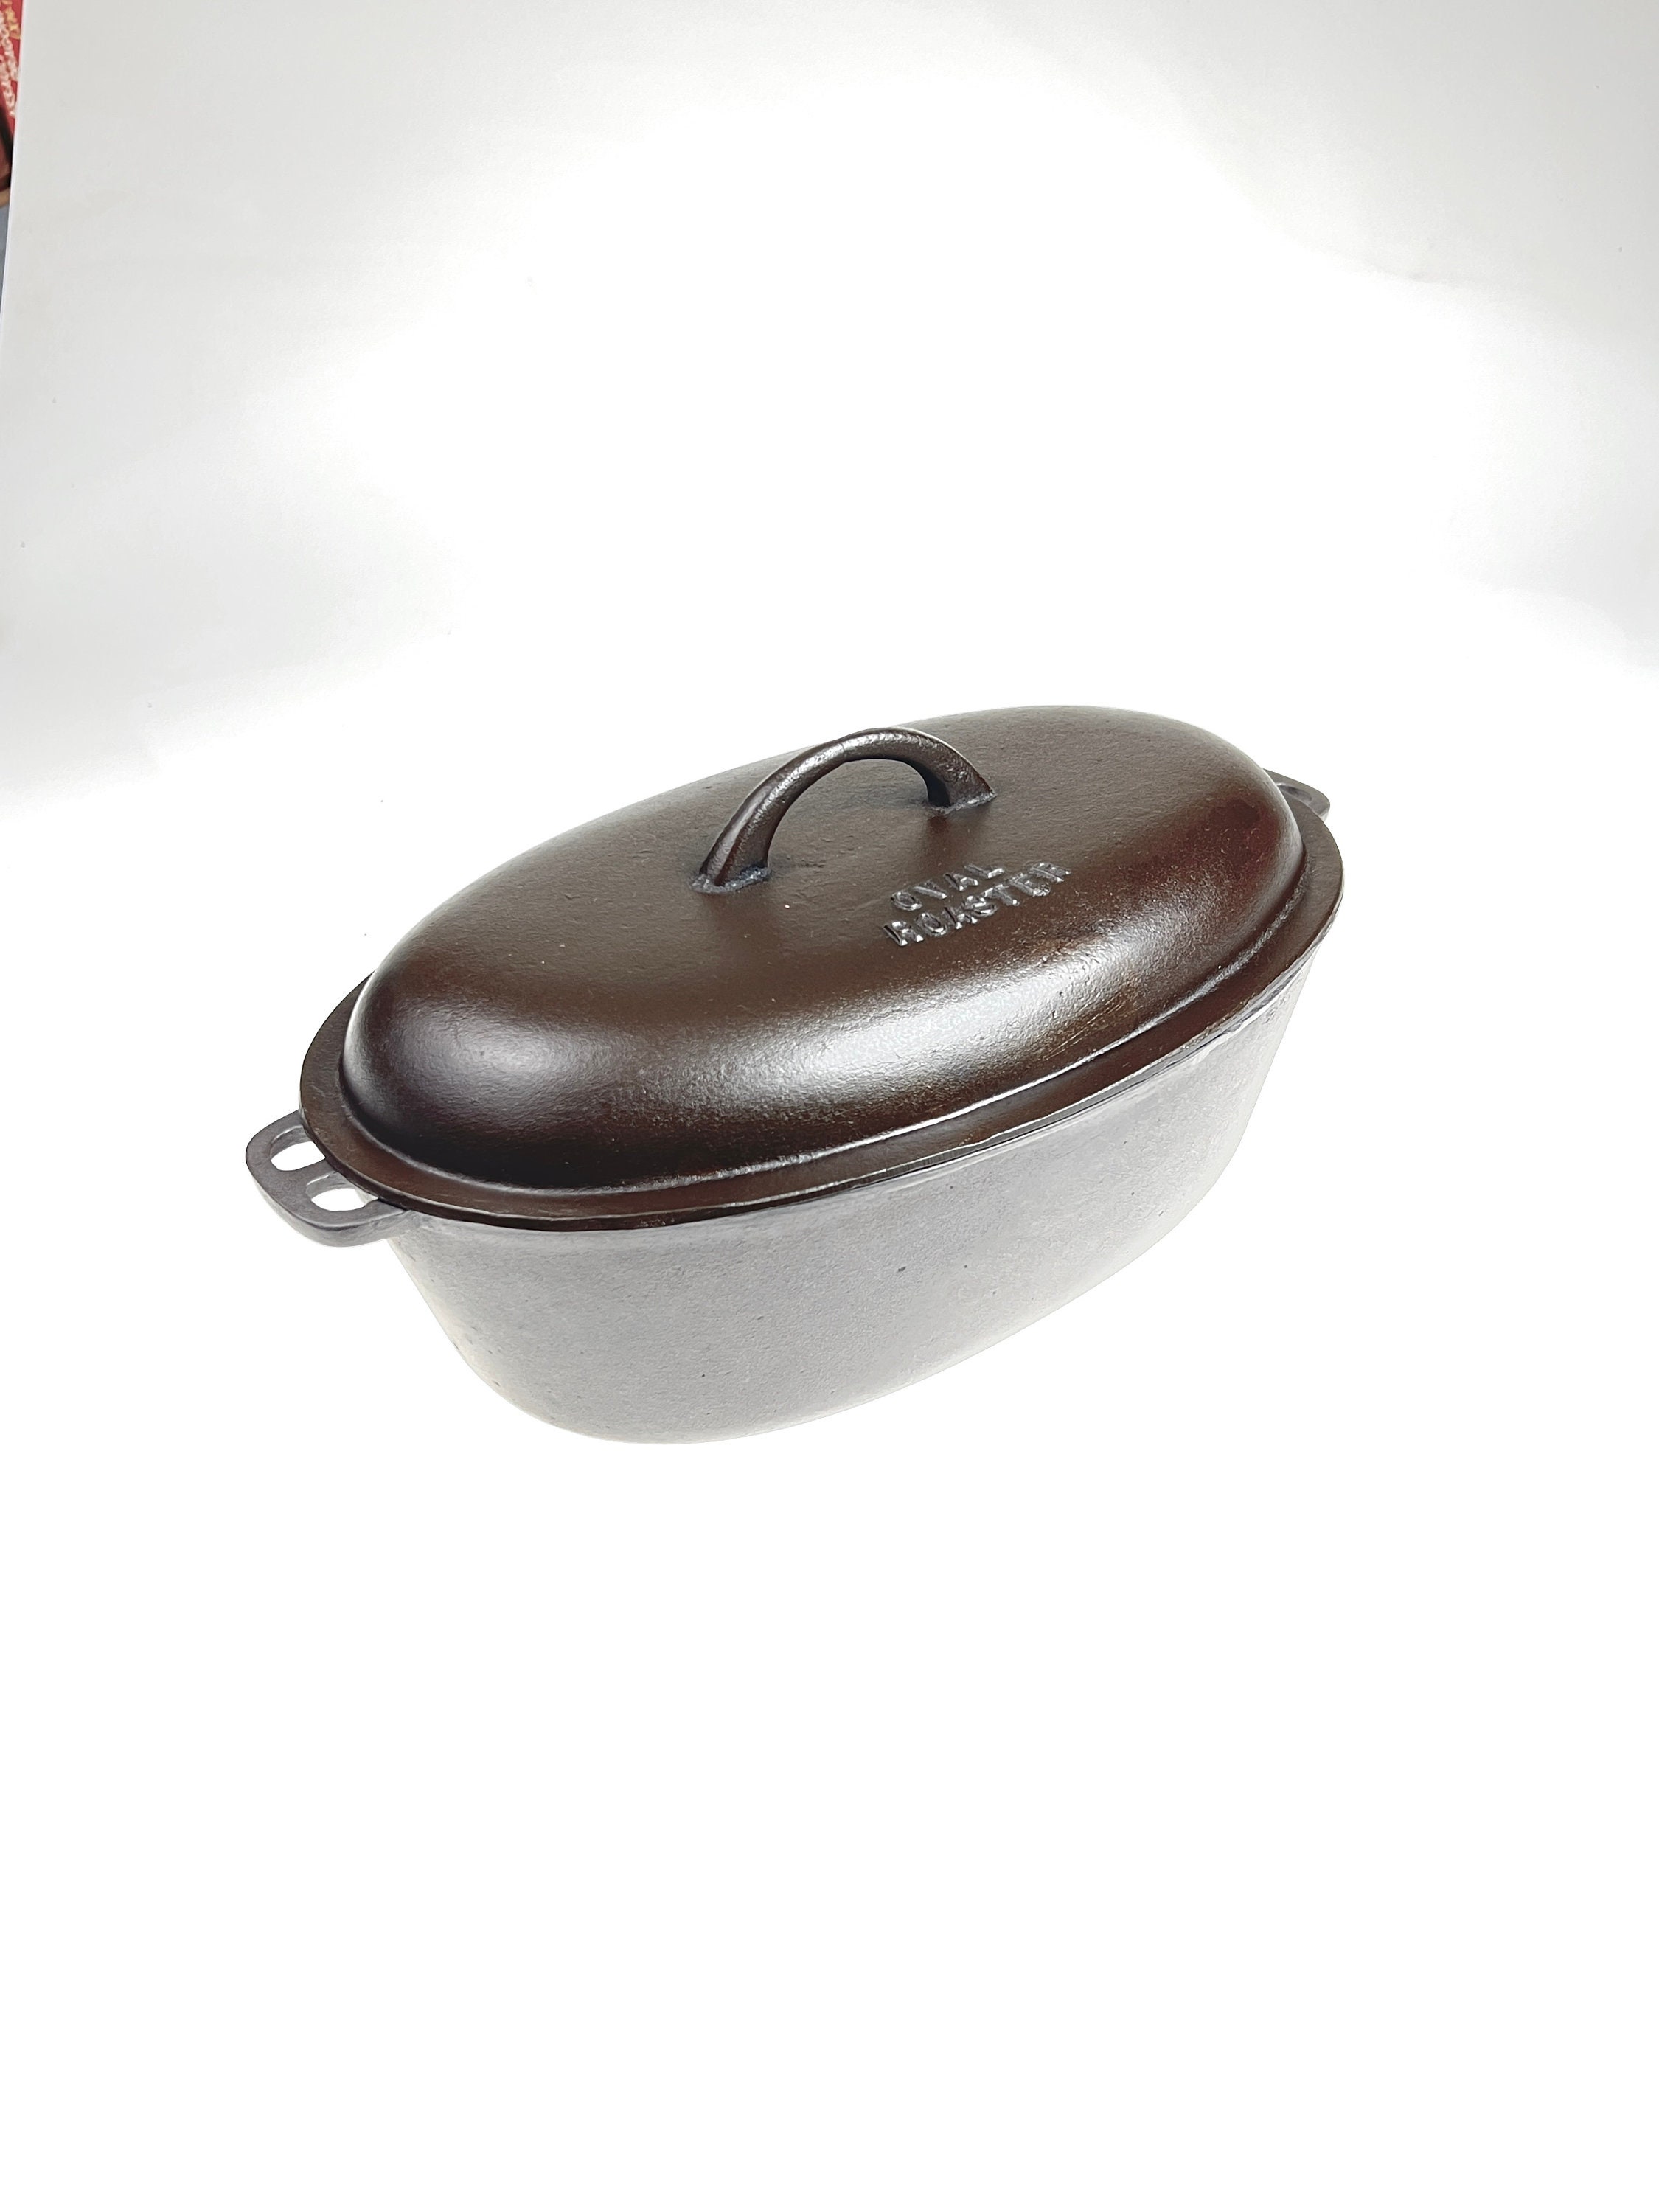 Lodge 2160031 9 in. Cast Iron Lid